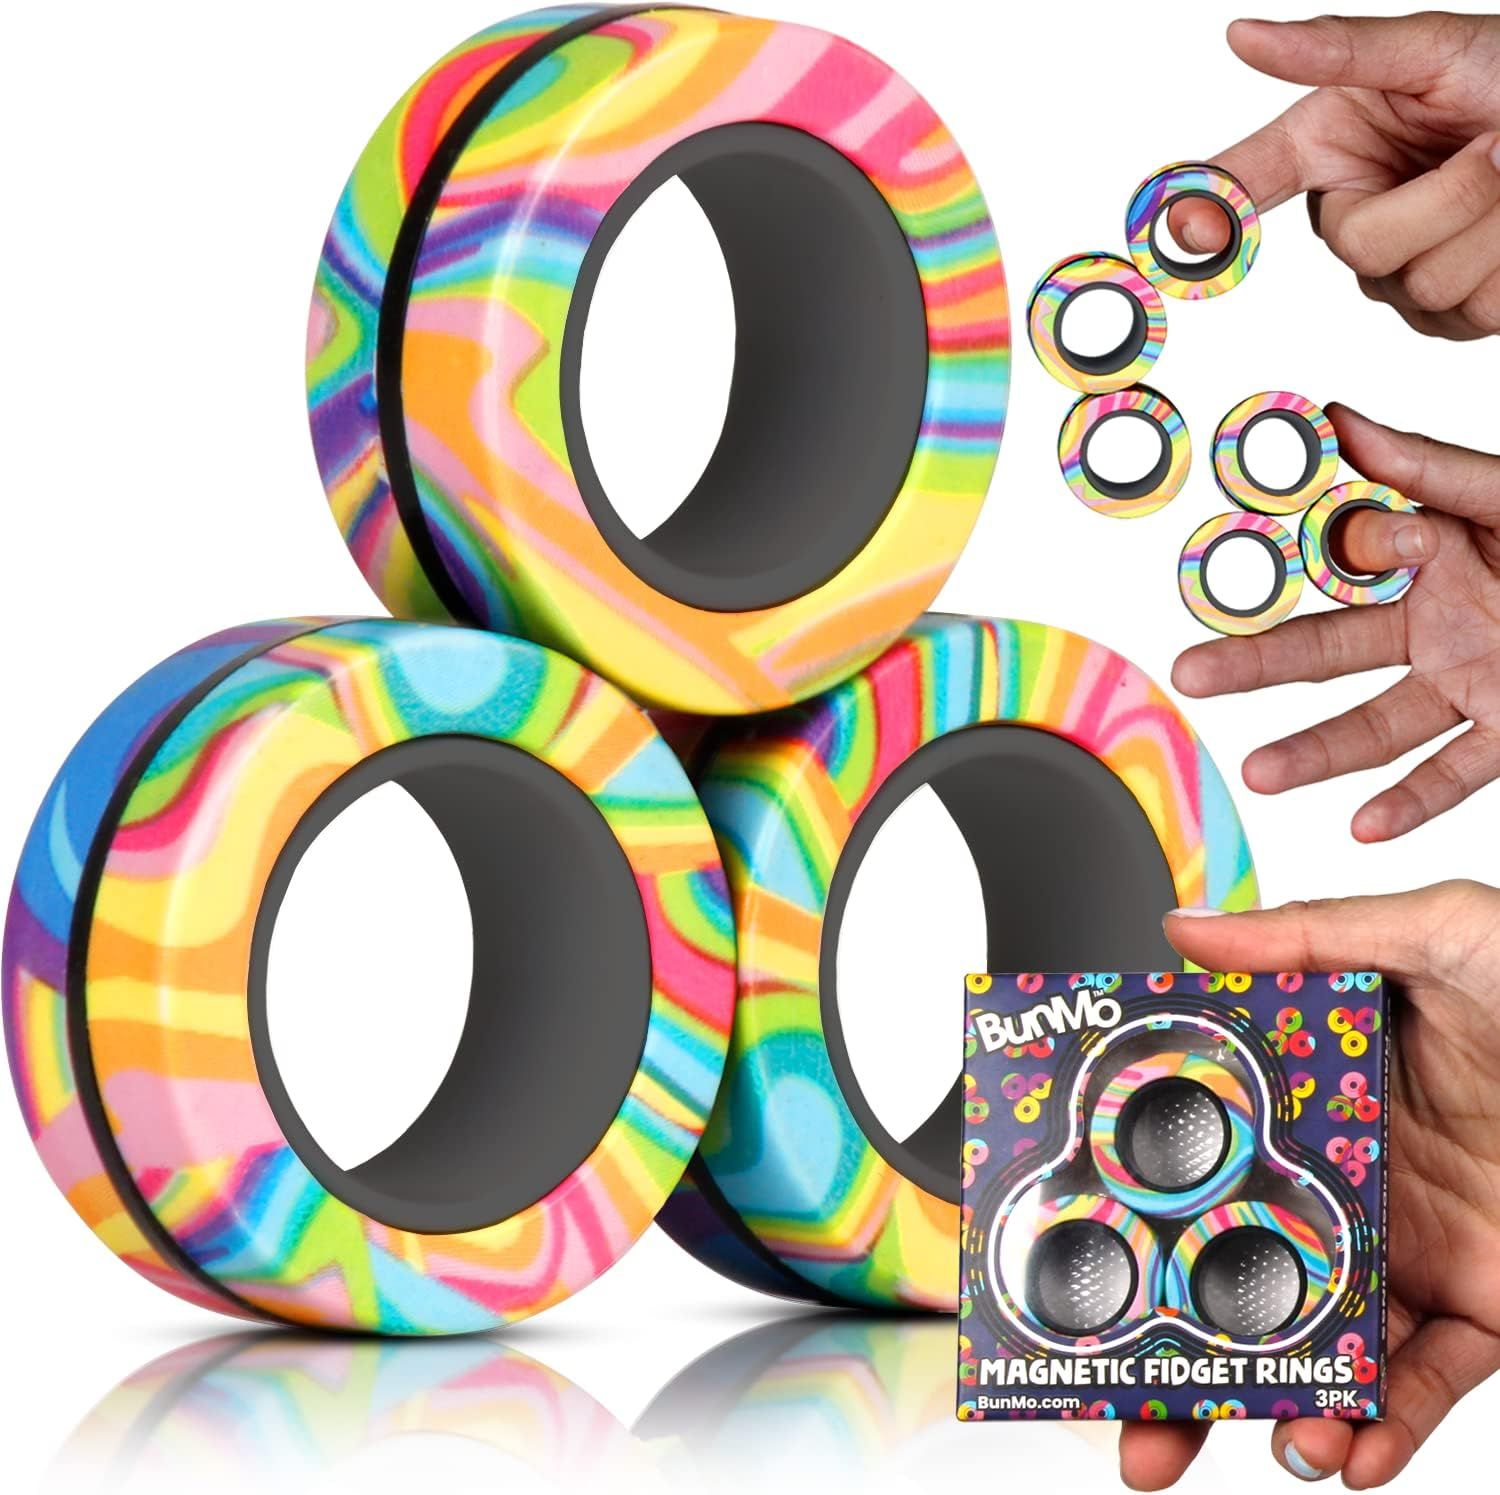 BunMo Fidget Toys - Magnetic Fidget Rings Fidget Toy. The Fidget Ring Spins, Connects, and Separa... | Amazon (US)